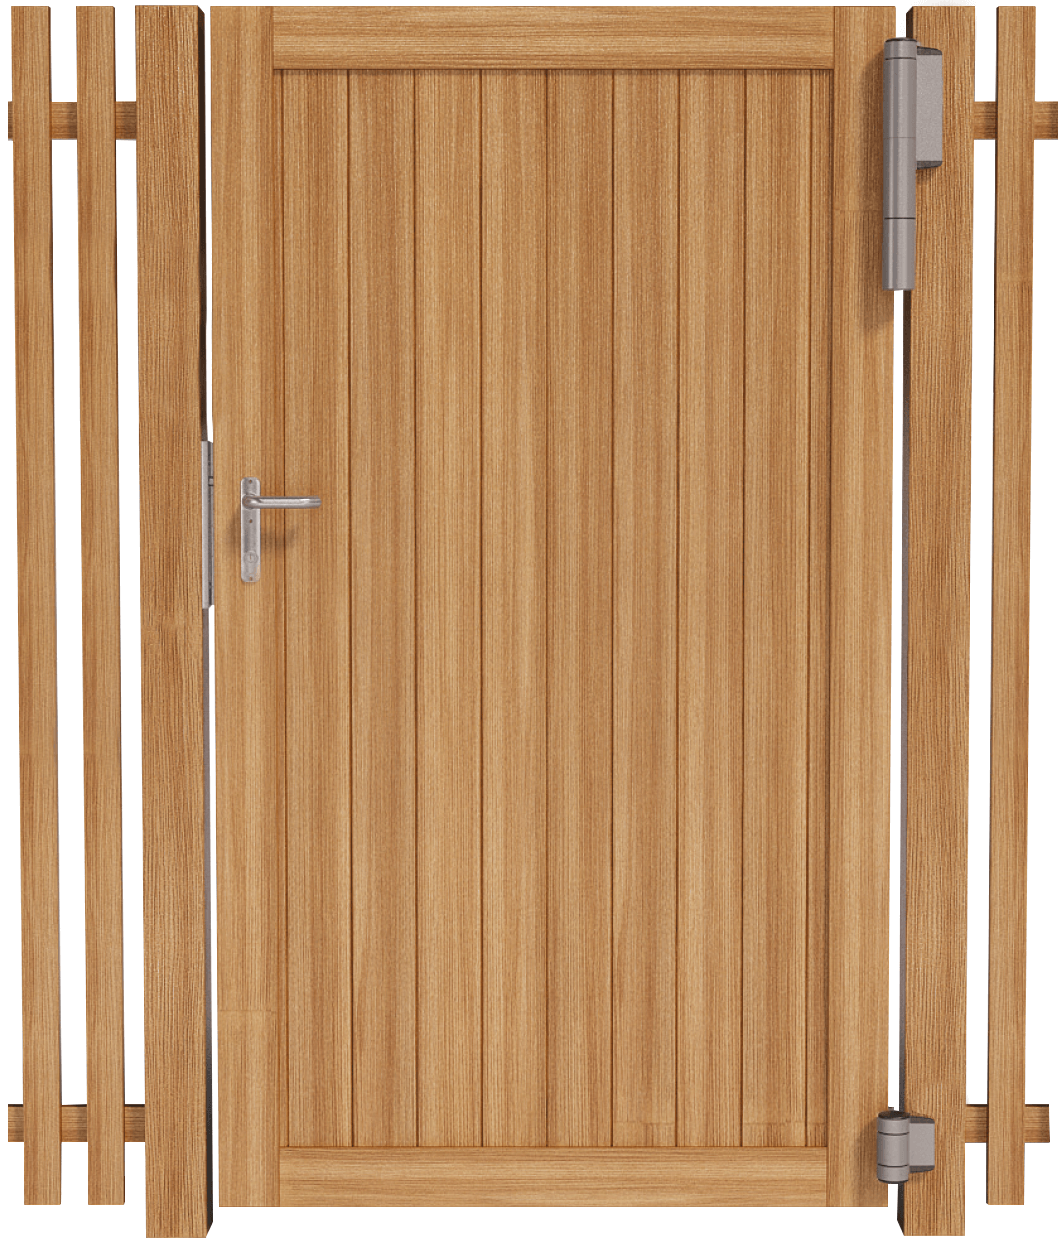 kasteel Albany maagd Hardware for wooden gates - Solutions by Locinox | Locinox